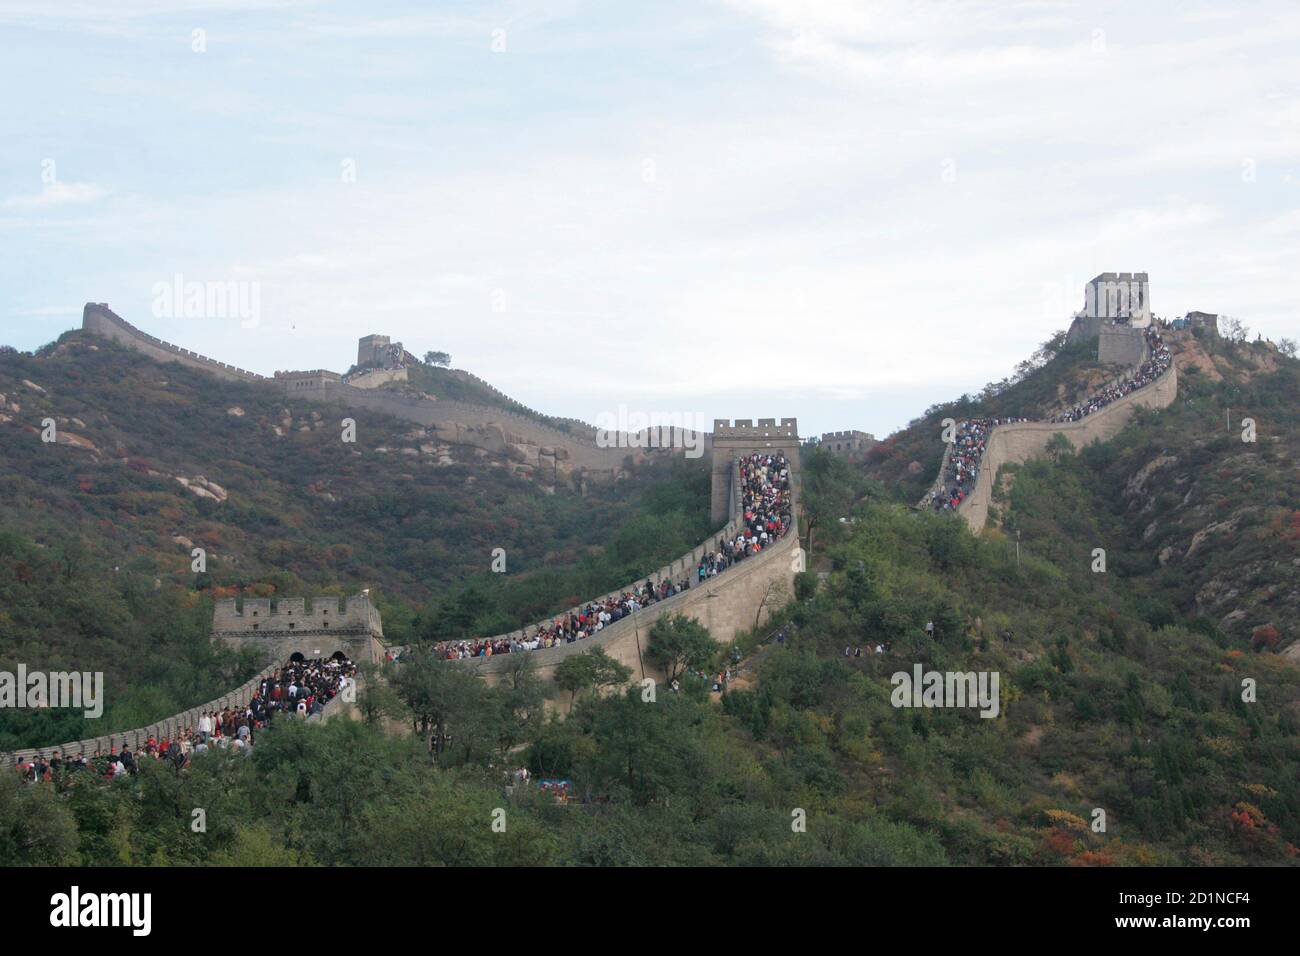 Visitors flock to the Badaling section of the Great Wall of China, north of Beijing, October 2, 2005. The Great Wall is attracting large numbers of visitors during China's week-long National Day 'Golden Week' holiday, which began on October 1. REUTERS/Jason Lee  BEST QUALITY AVAILABLE Stock Photo